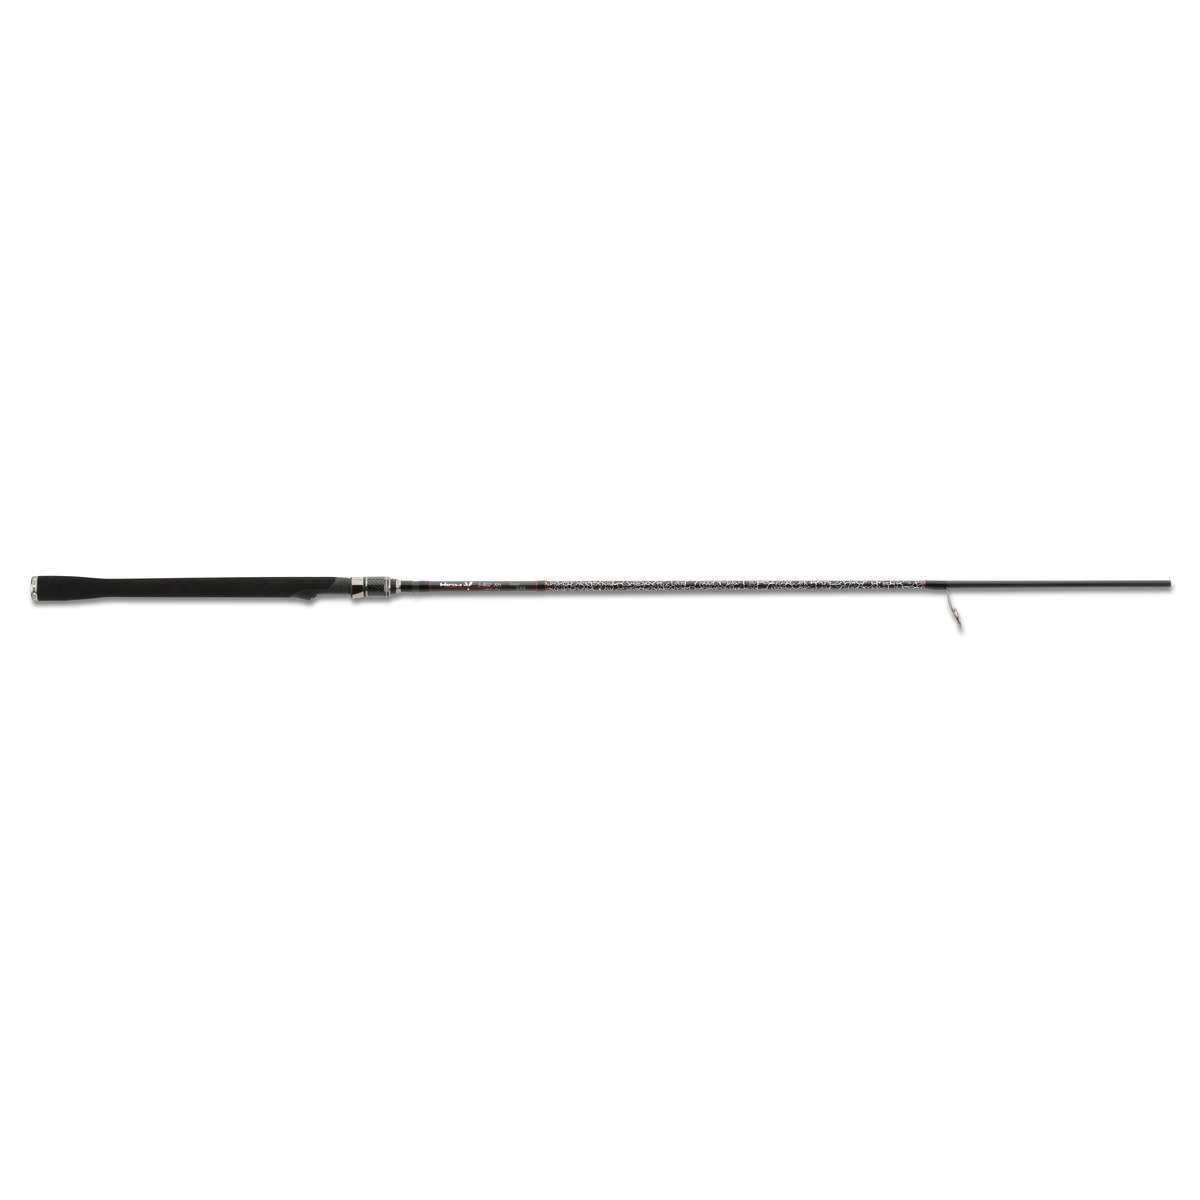 Iron Claw High-v Pike - S802XH Shad 244 25-75 g